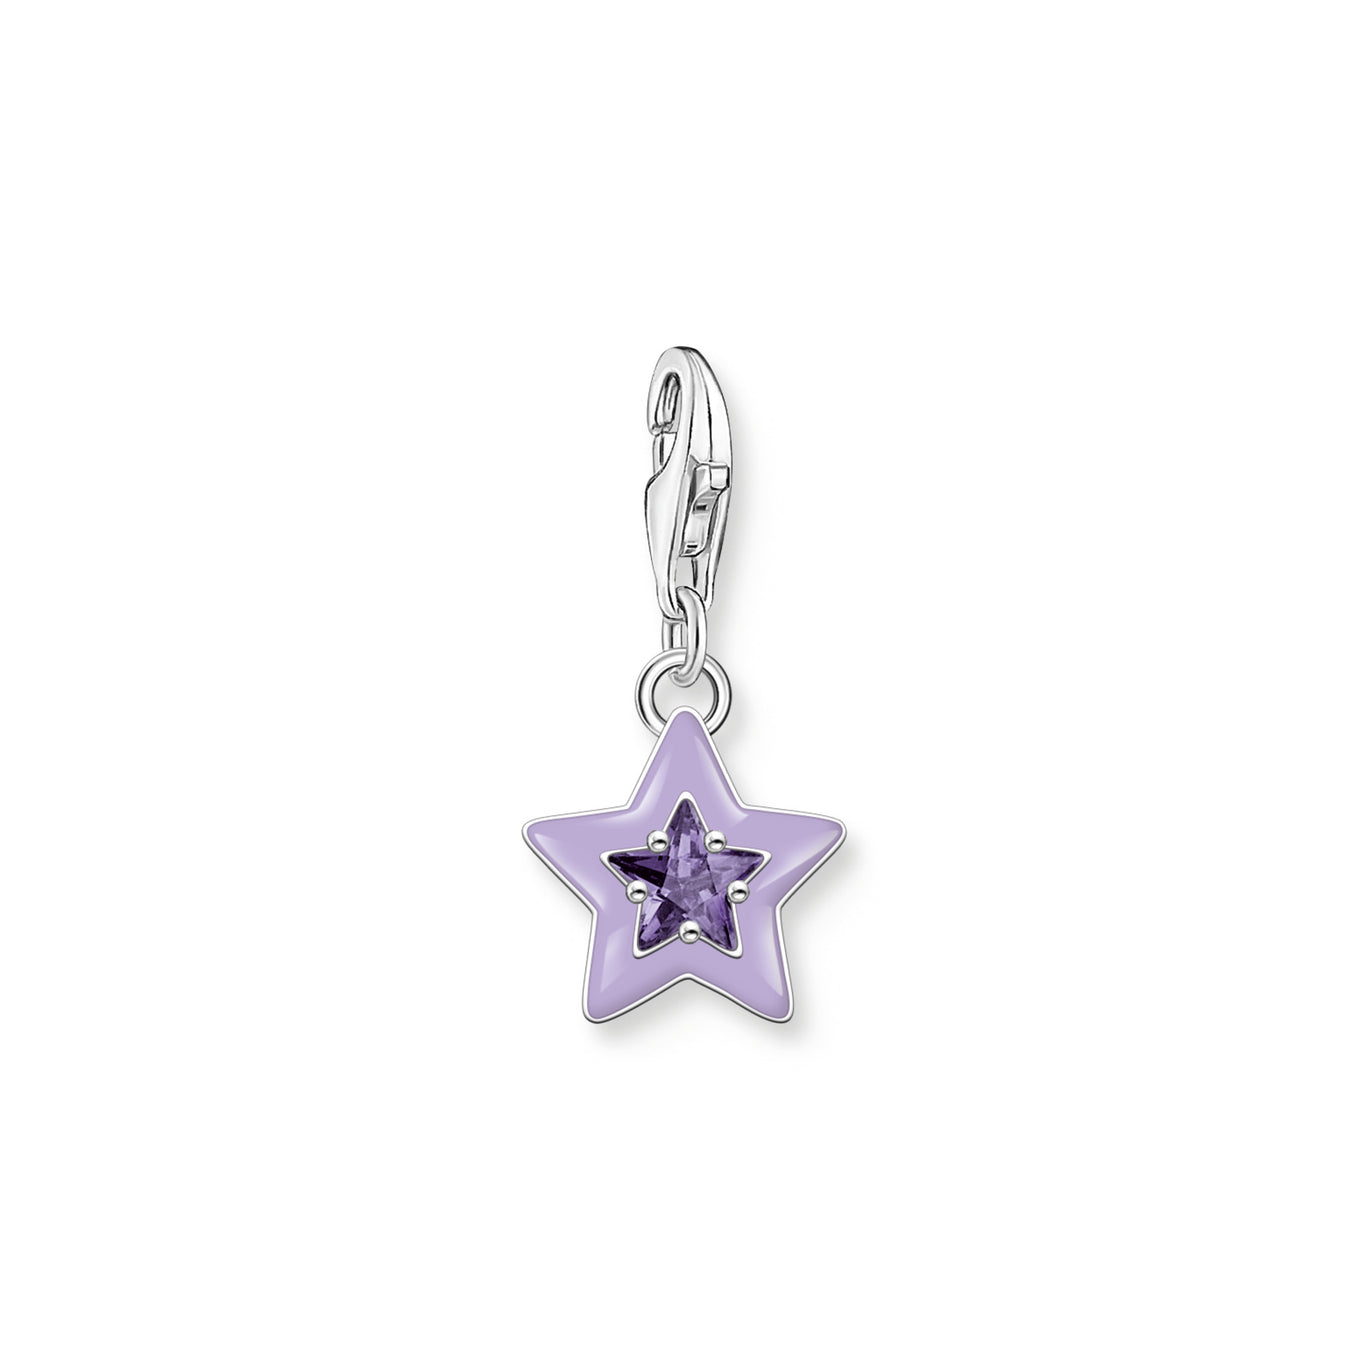 Thomas Sabo Silver Star Charm with Amethyst Coloured Stone and Enamel